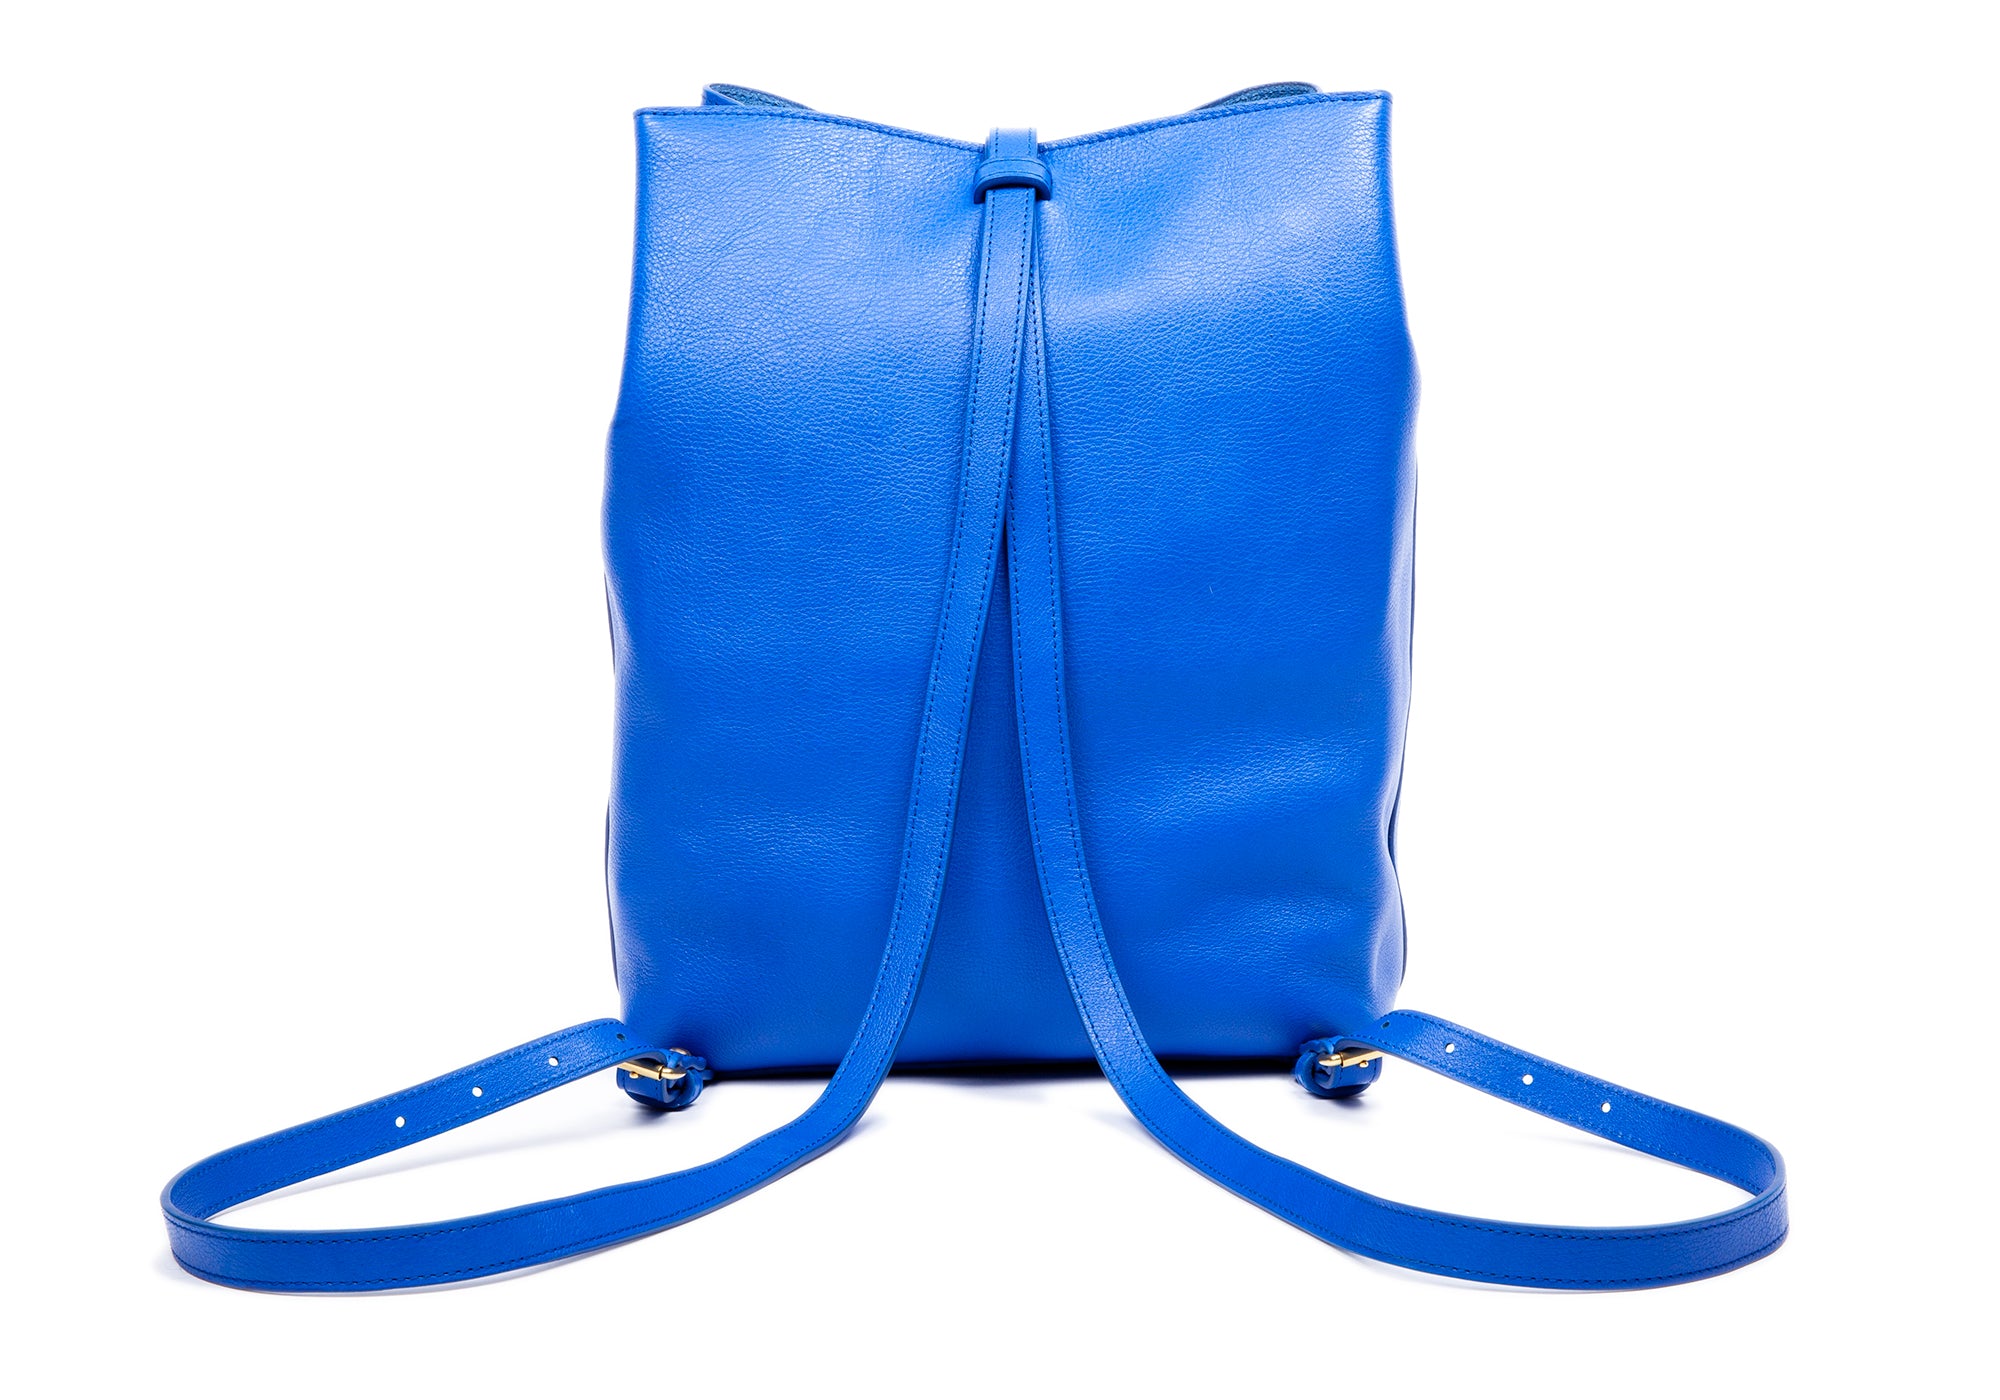 The Sling Backpack - Handmade Women's Leather Backpack and Bucket Bag